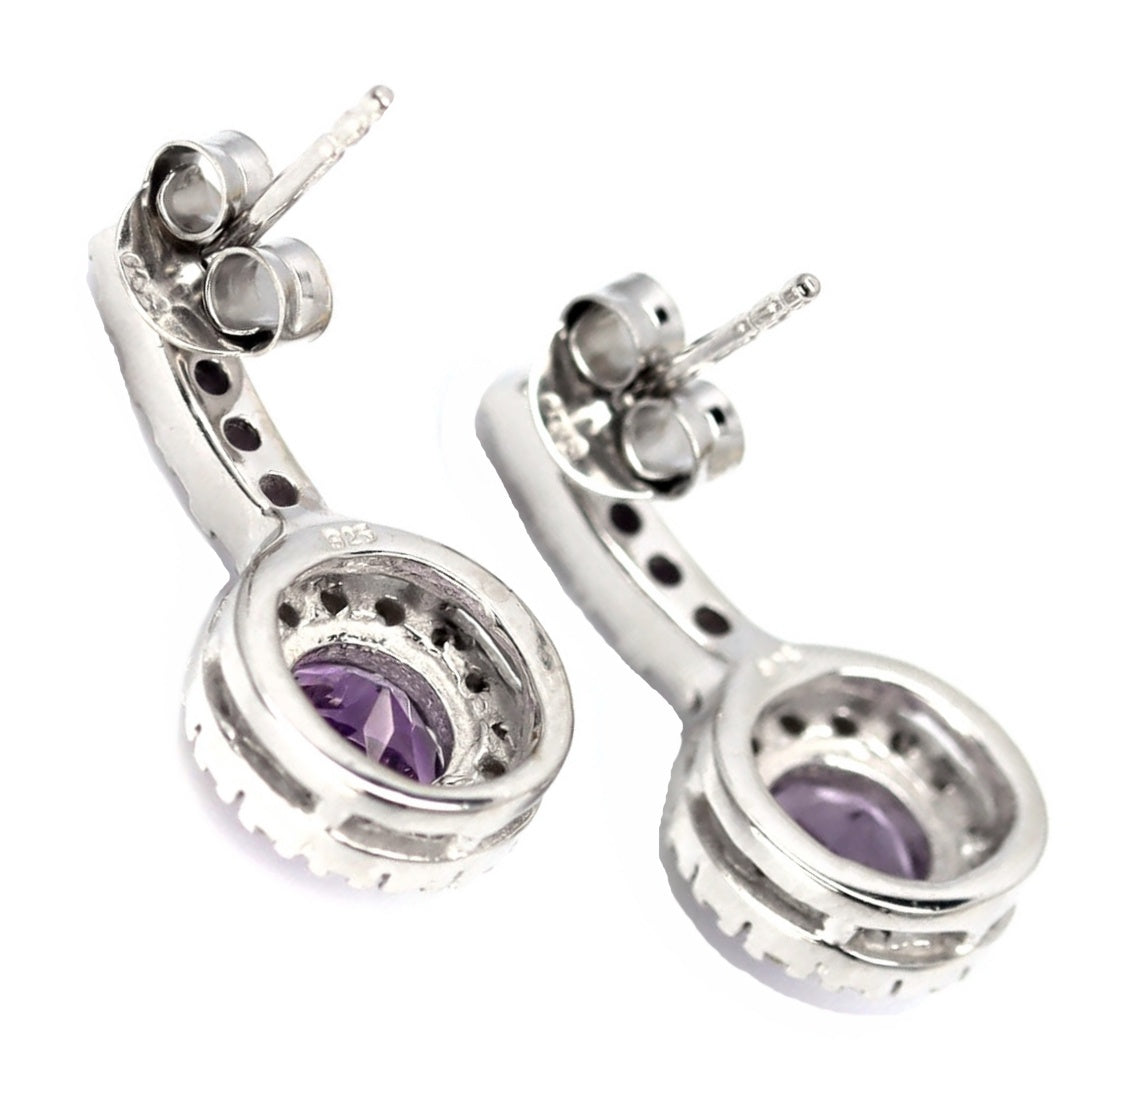 23.08 cts Authentic Unheated Purple Amethyst, White Topaz In Solid .925 Sterling Silver 14K White Gold Stud Earrings